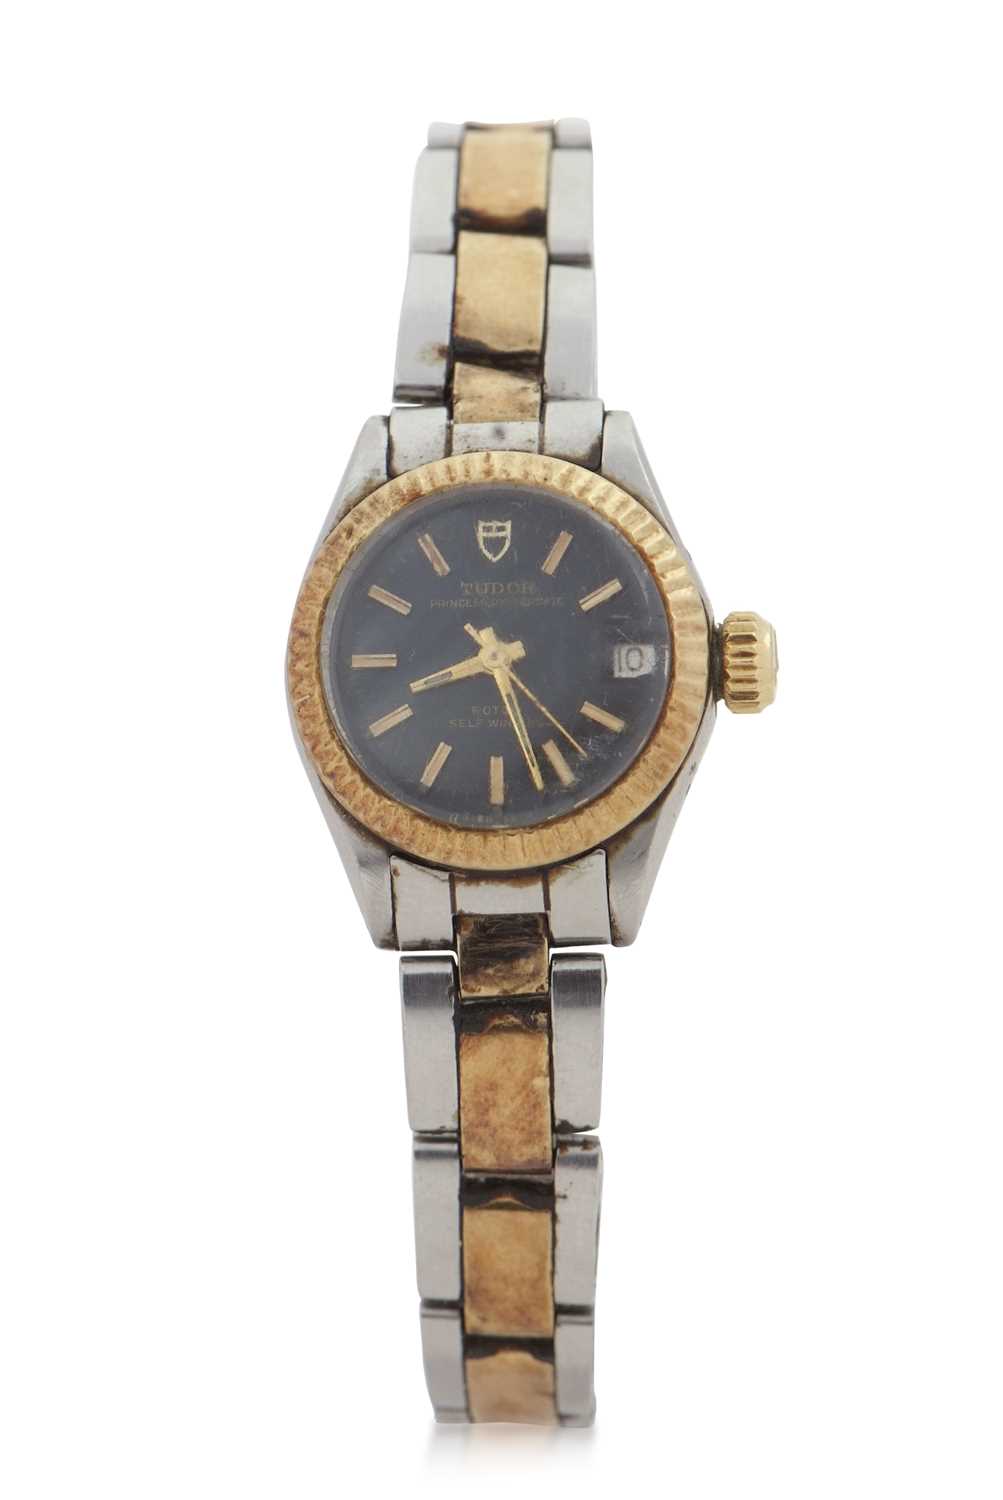 A ladies Tudor Princess Oyster date, it has an automatic movement, a Rolex stamped bracelet clasp